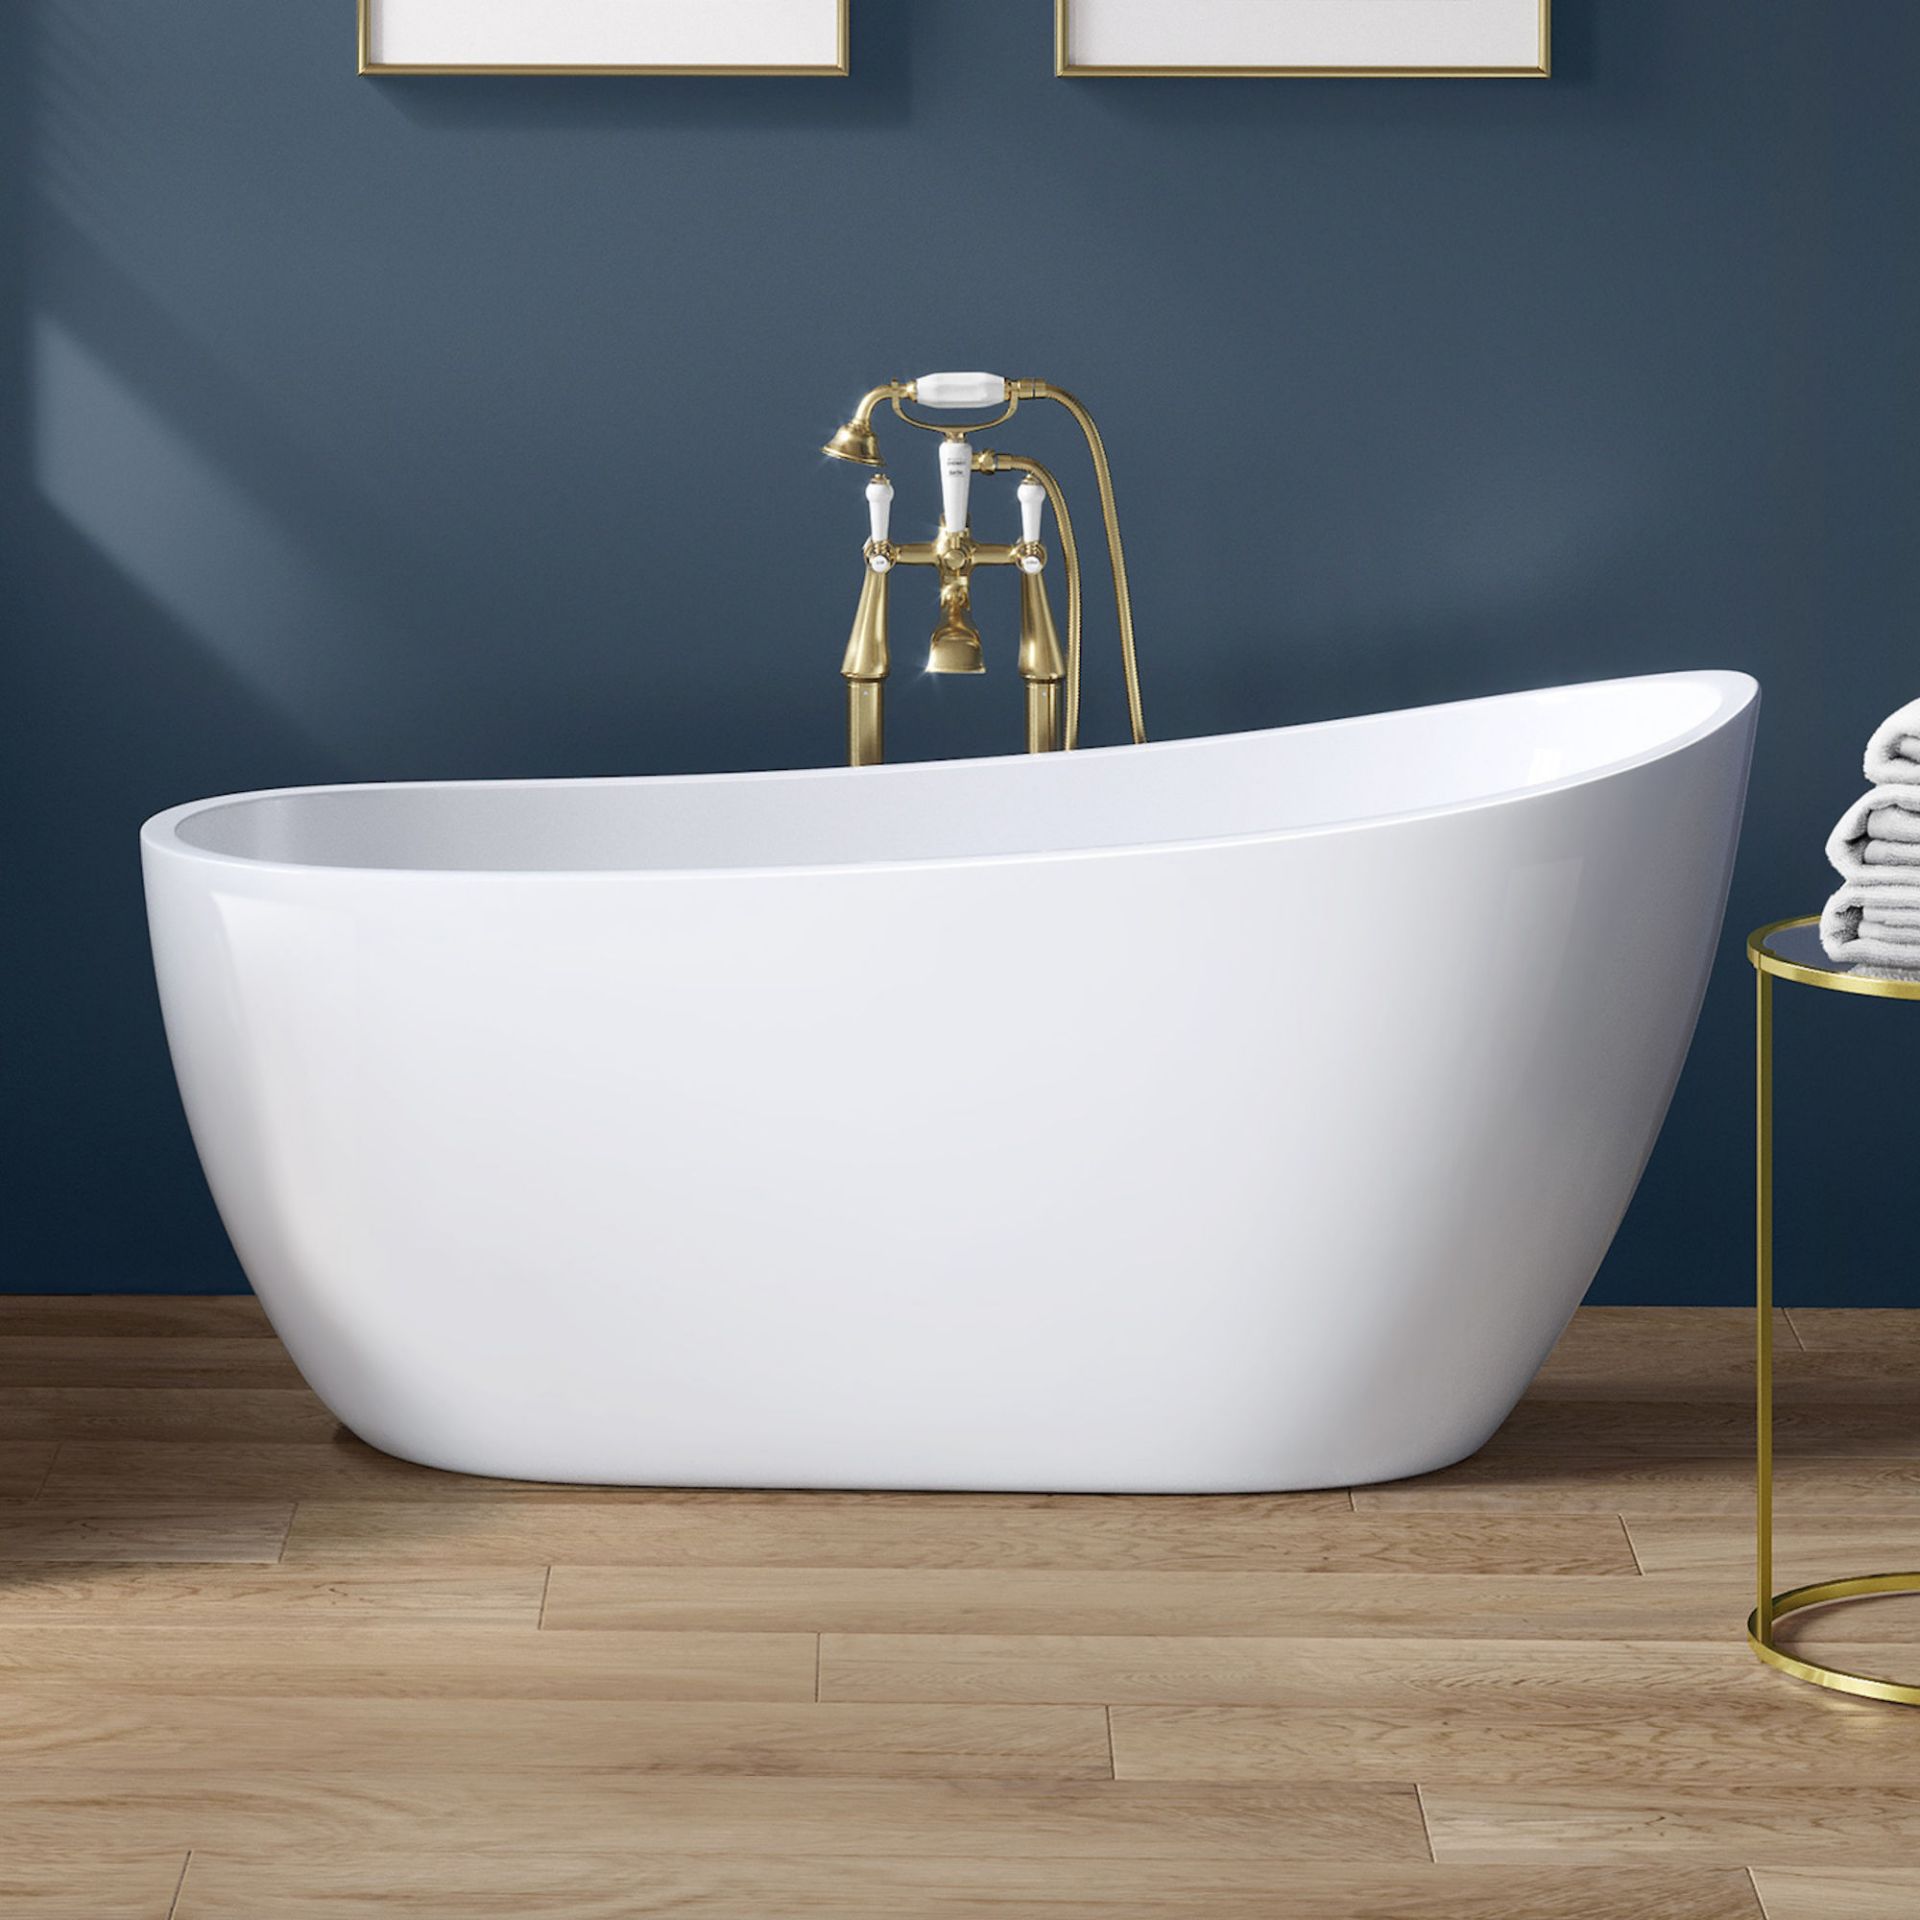 (OS57) 1520mmx720mm Willow Freestanding Bath. Showcasing contemporary clean lines for a centre piece